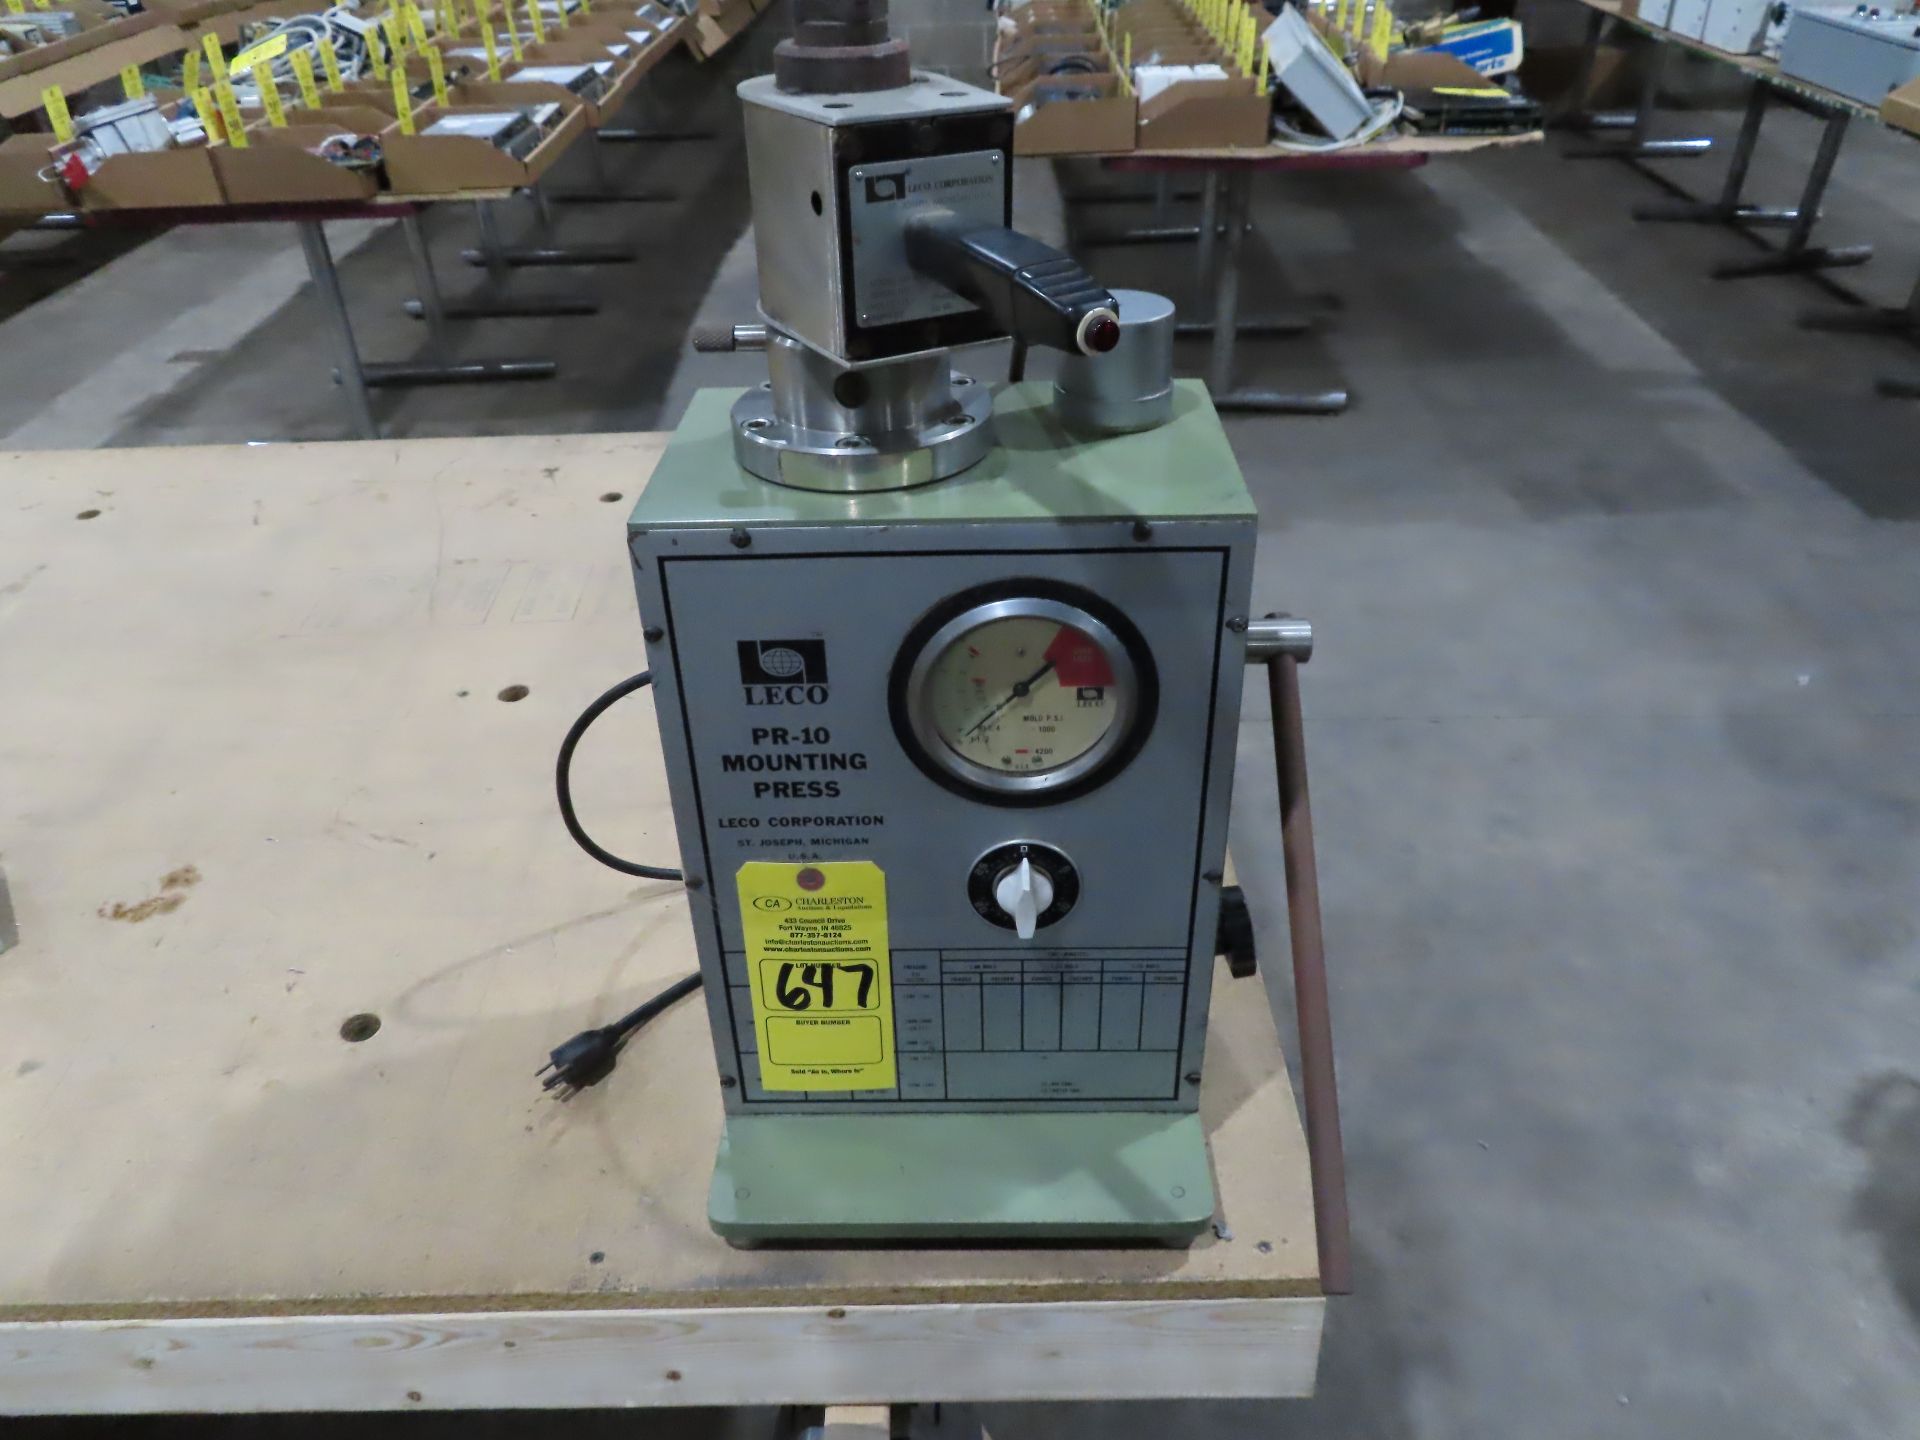 Leco PR-10 mounting press, with 802-669, 115v, as always, with Brolyn LLC auctions, all lots can